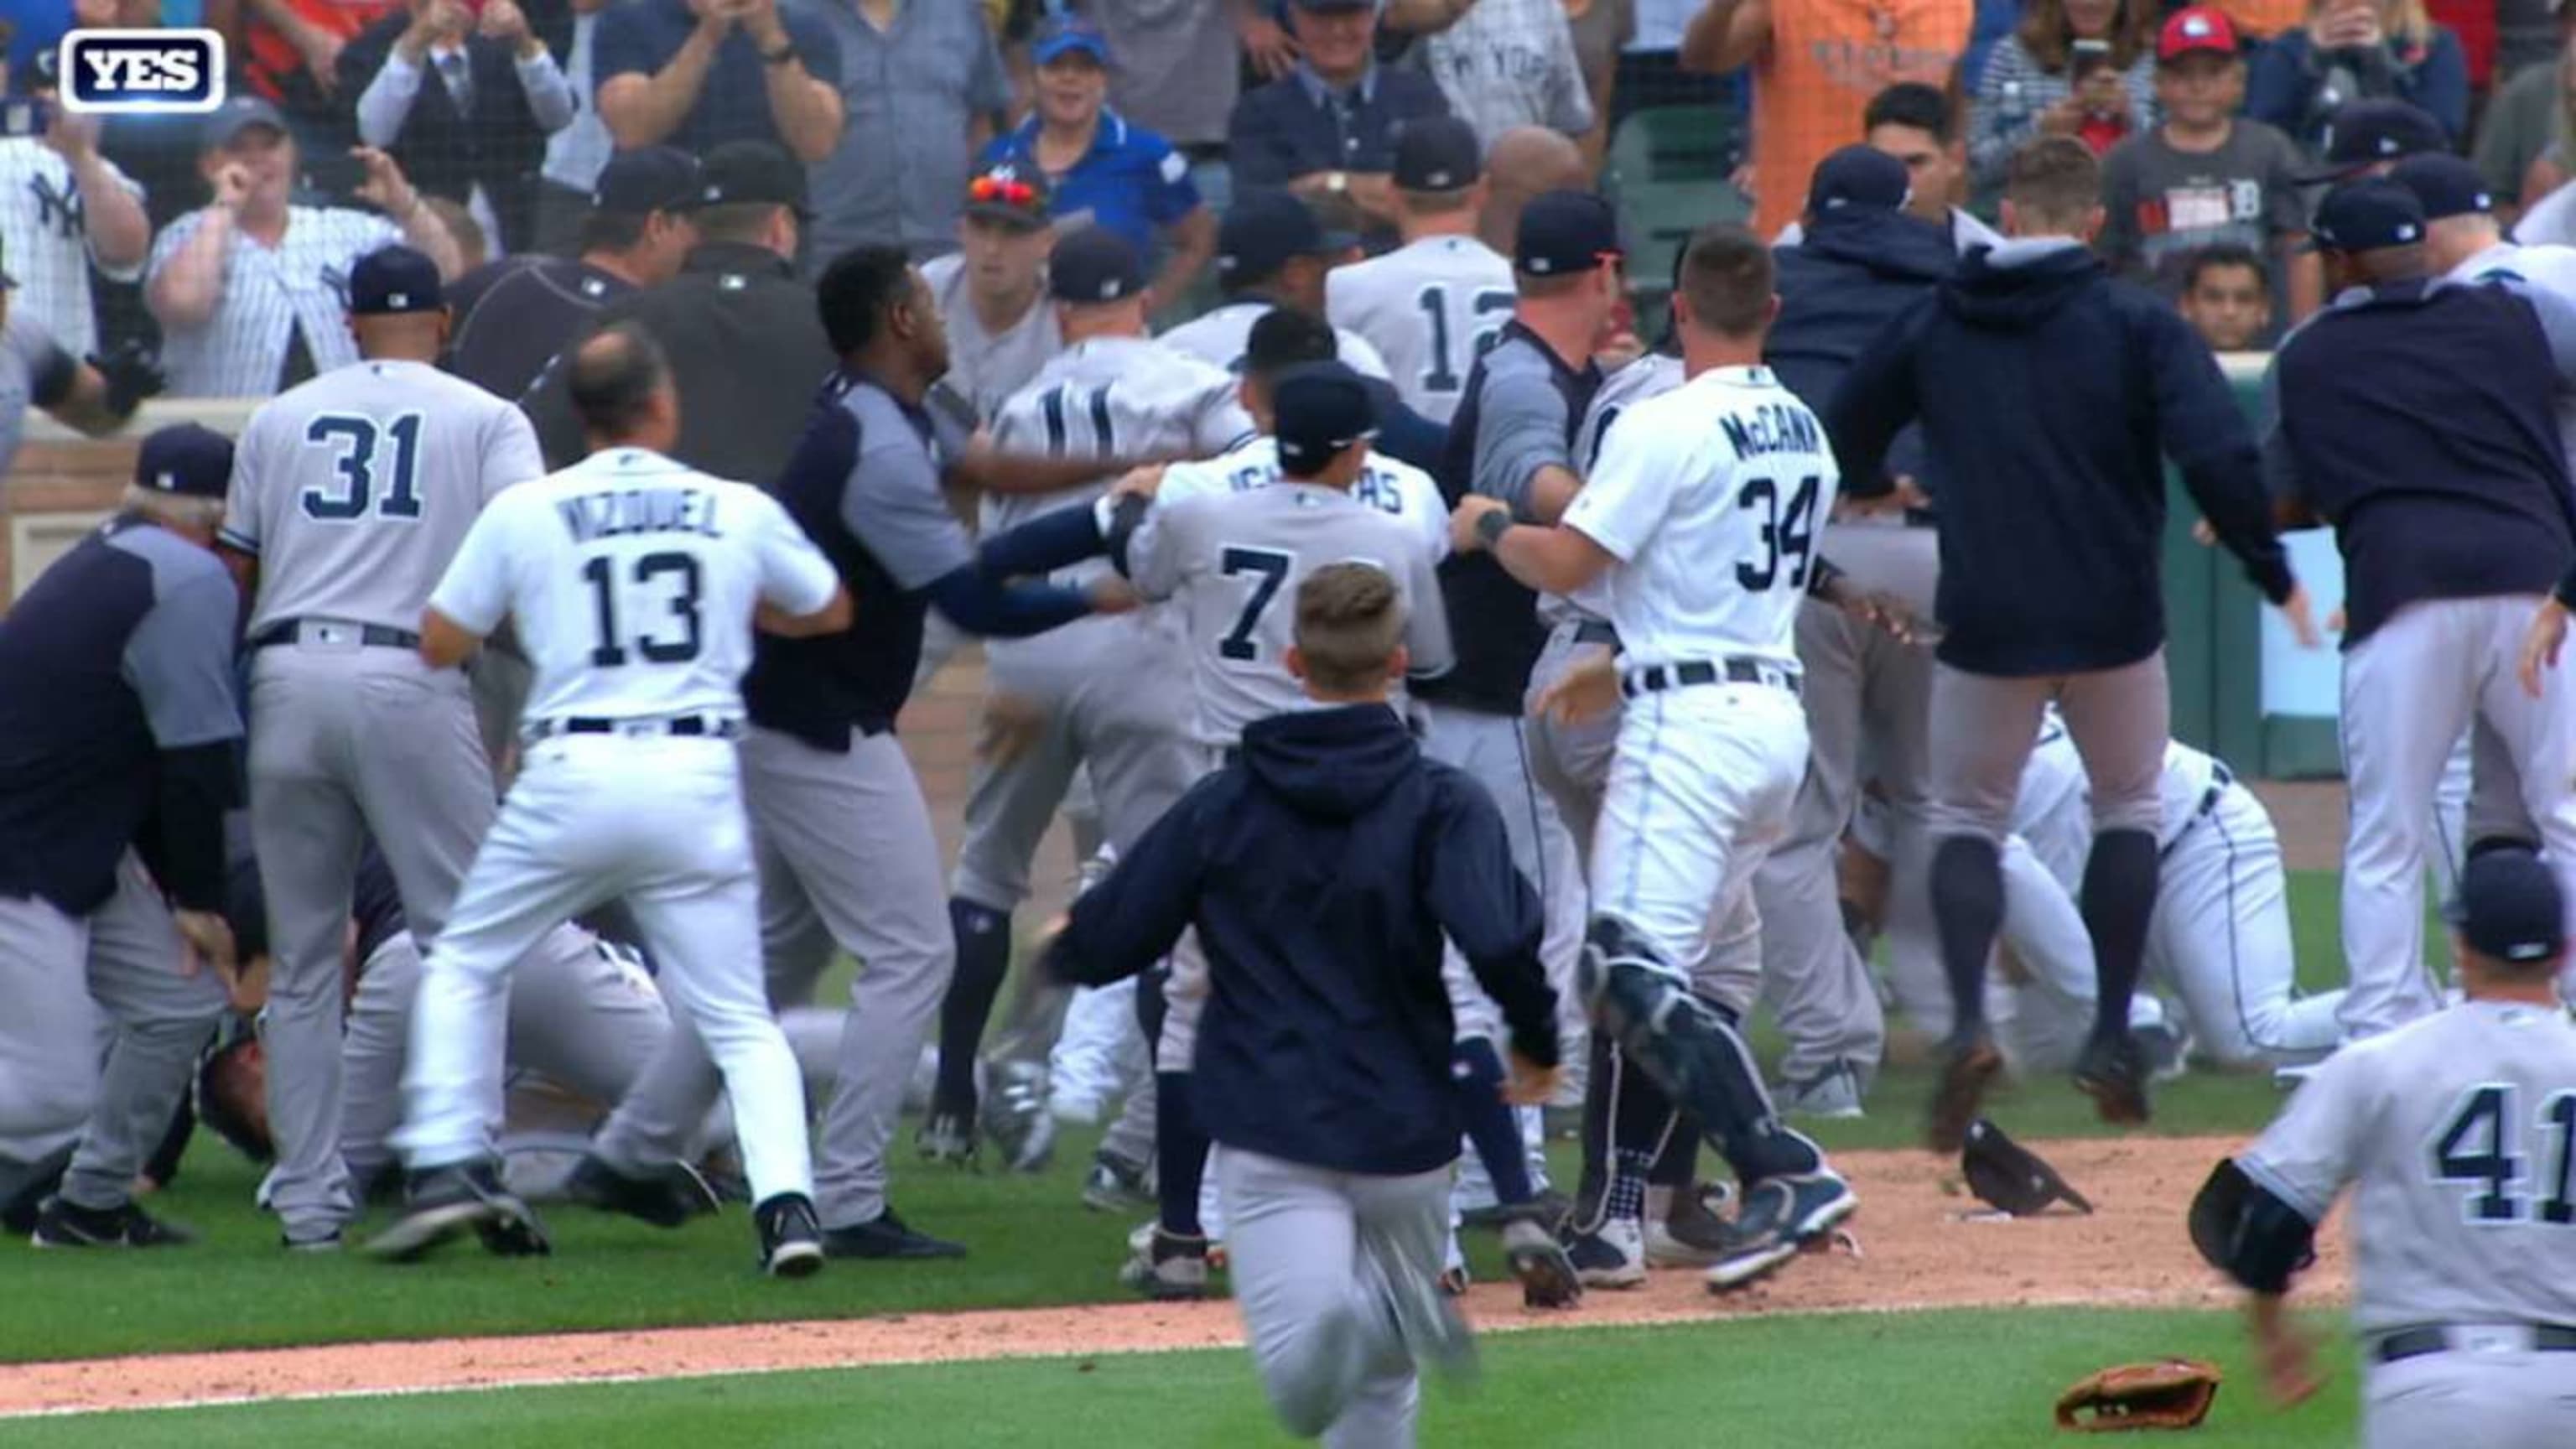 Baseball fights are so lame” “The bullpen running out to do absolutely  nothing is always my favorite part” - MLB Twitter reacts to  benches-clearing during Baltimore Orioles' 9-6 win over Toronto Blue